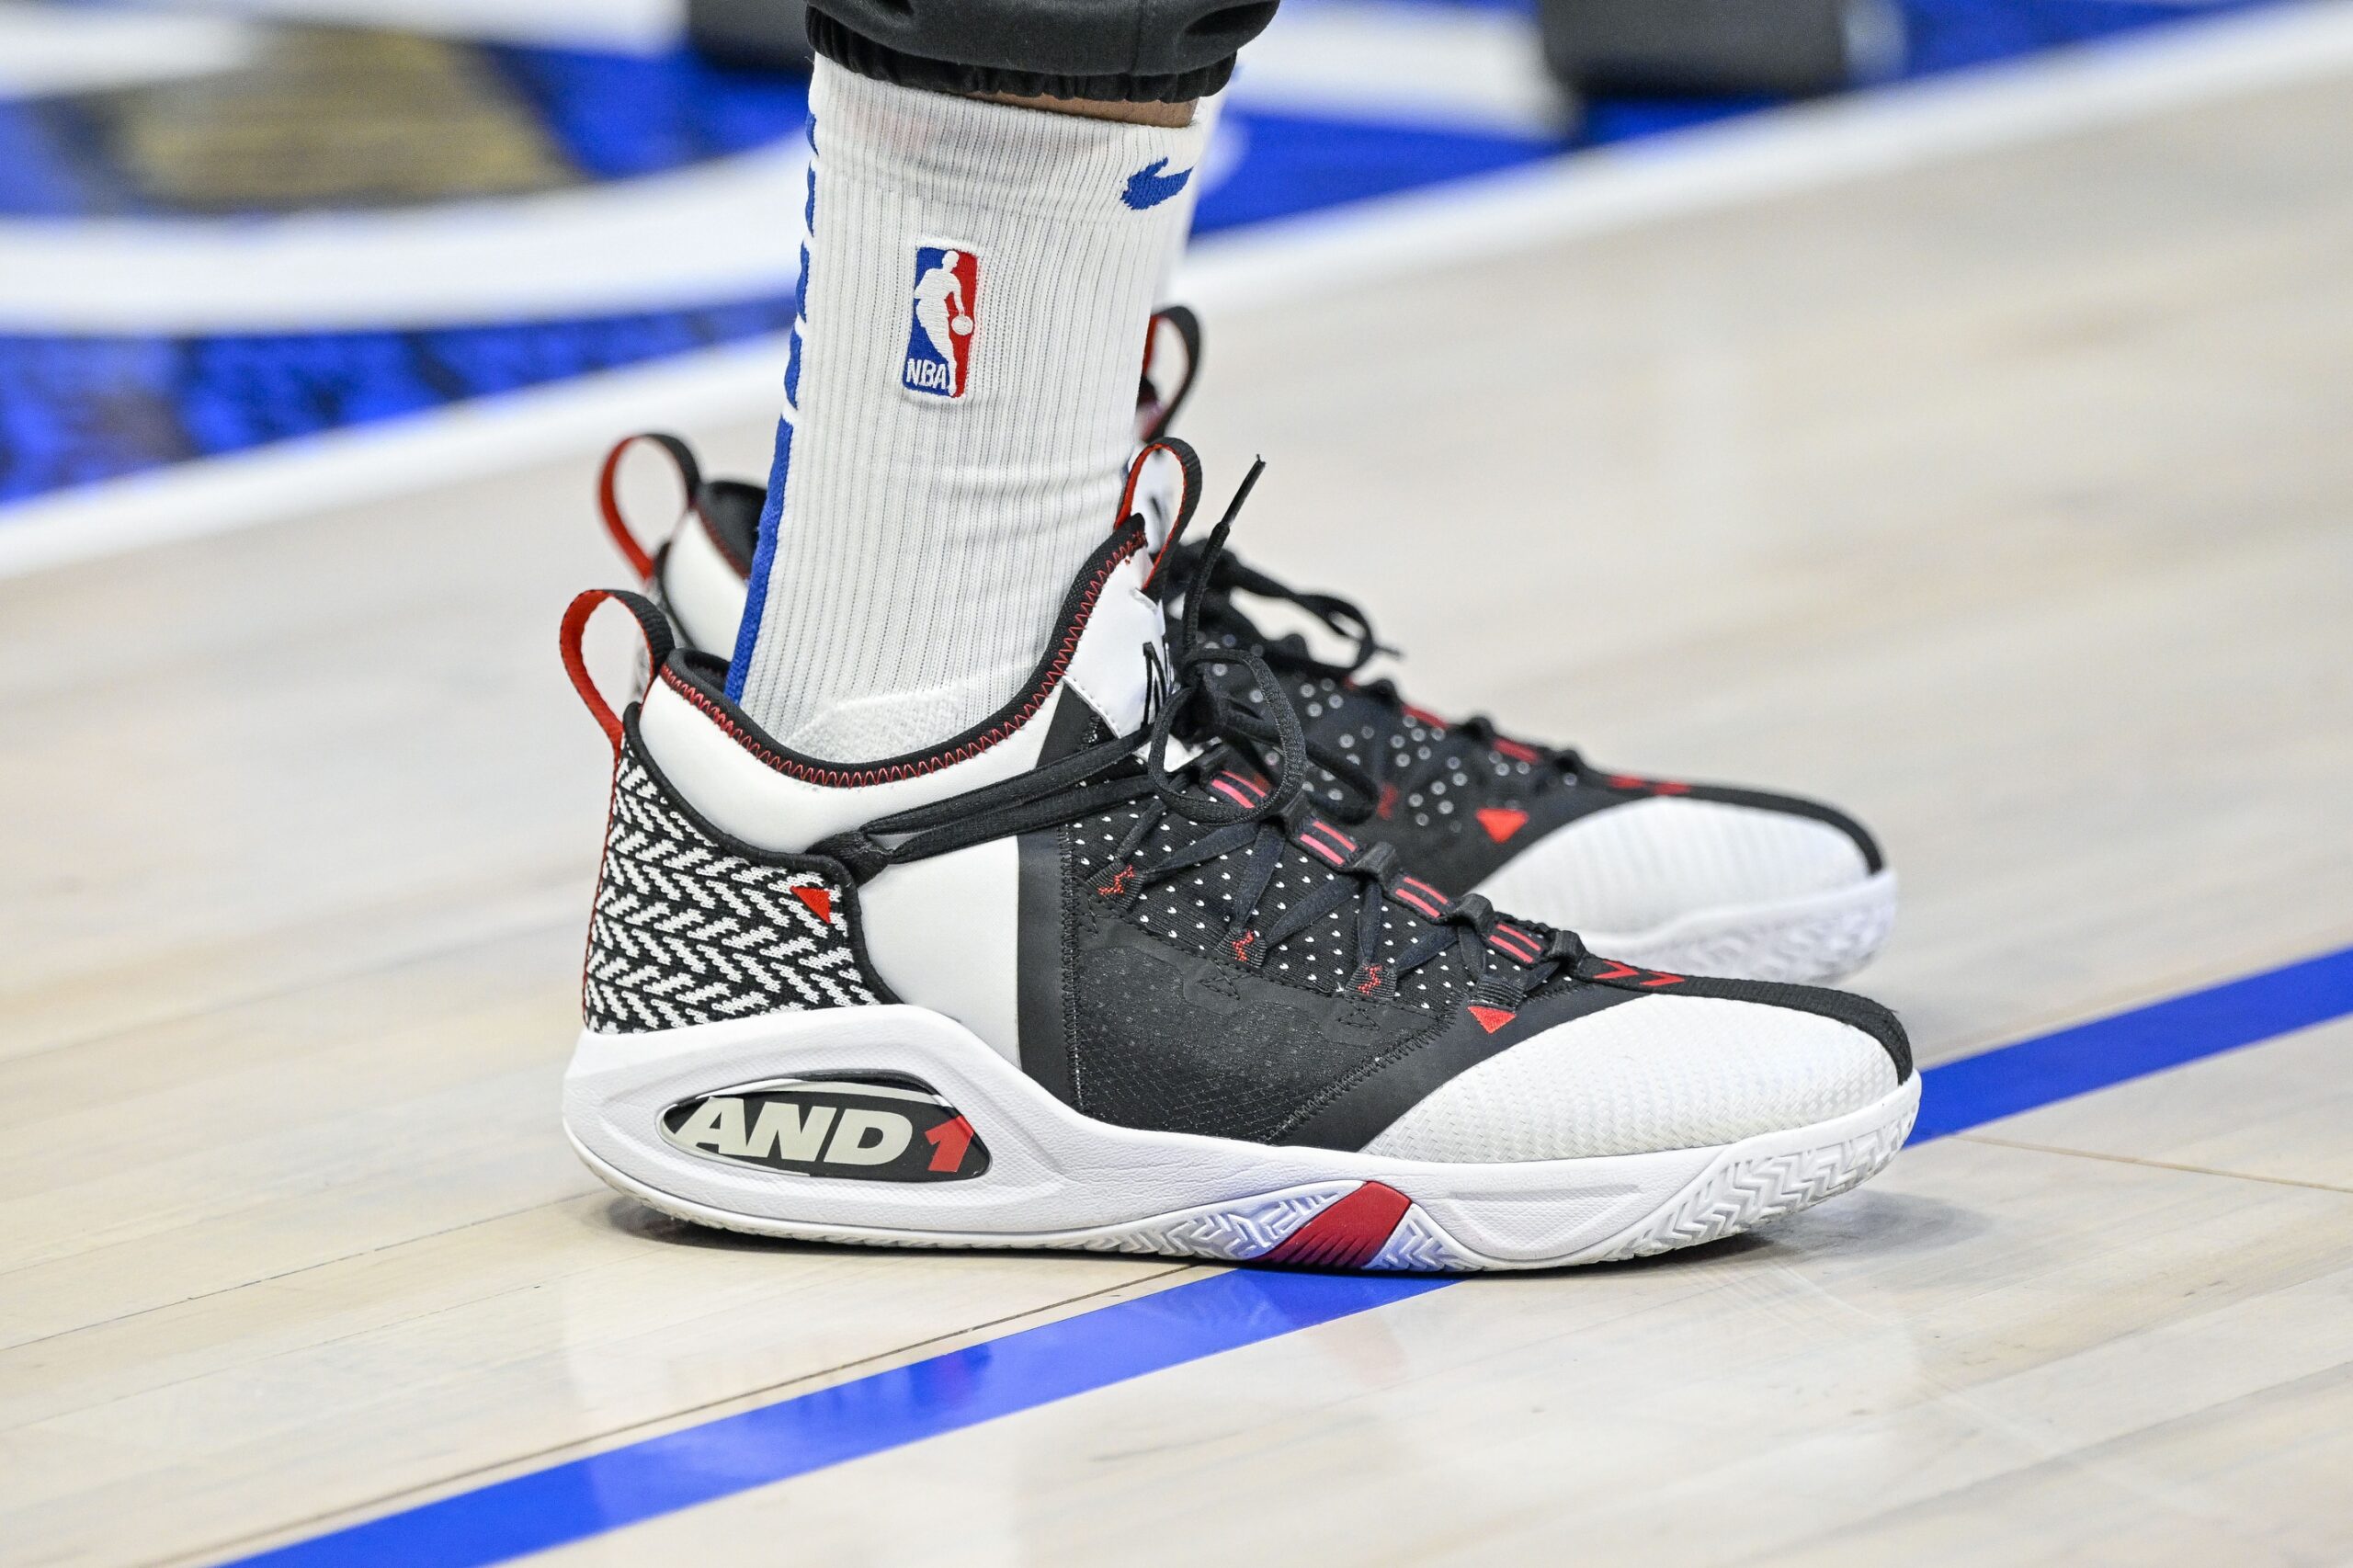 Jan 22, 2023; Dallas, Texas, USA; A view of the sneaker shoes of LA Clippers guard John Wall (11) as he warms up before the game between the Dallas Mavericks and the LA Clippers at the American Airlines Center. Mandatory Credit: Jerome Miron-USA TODAY Sports